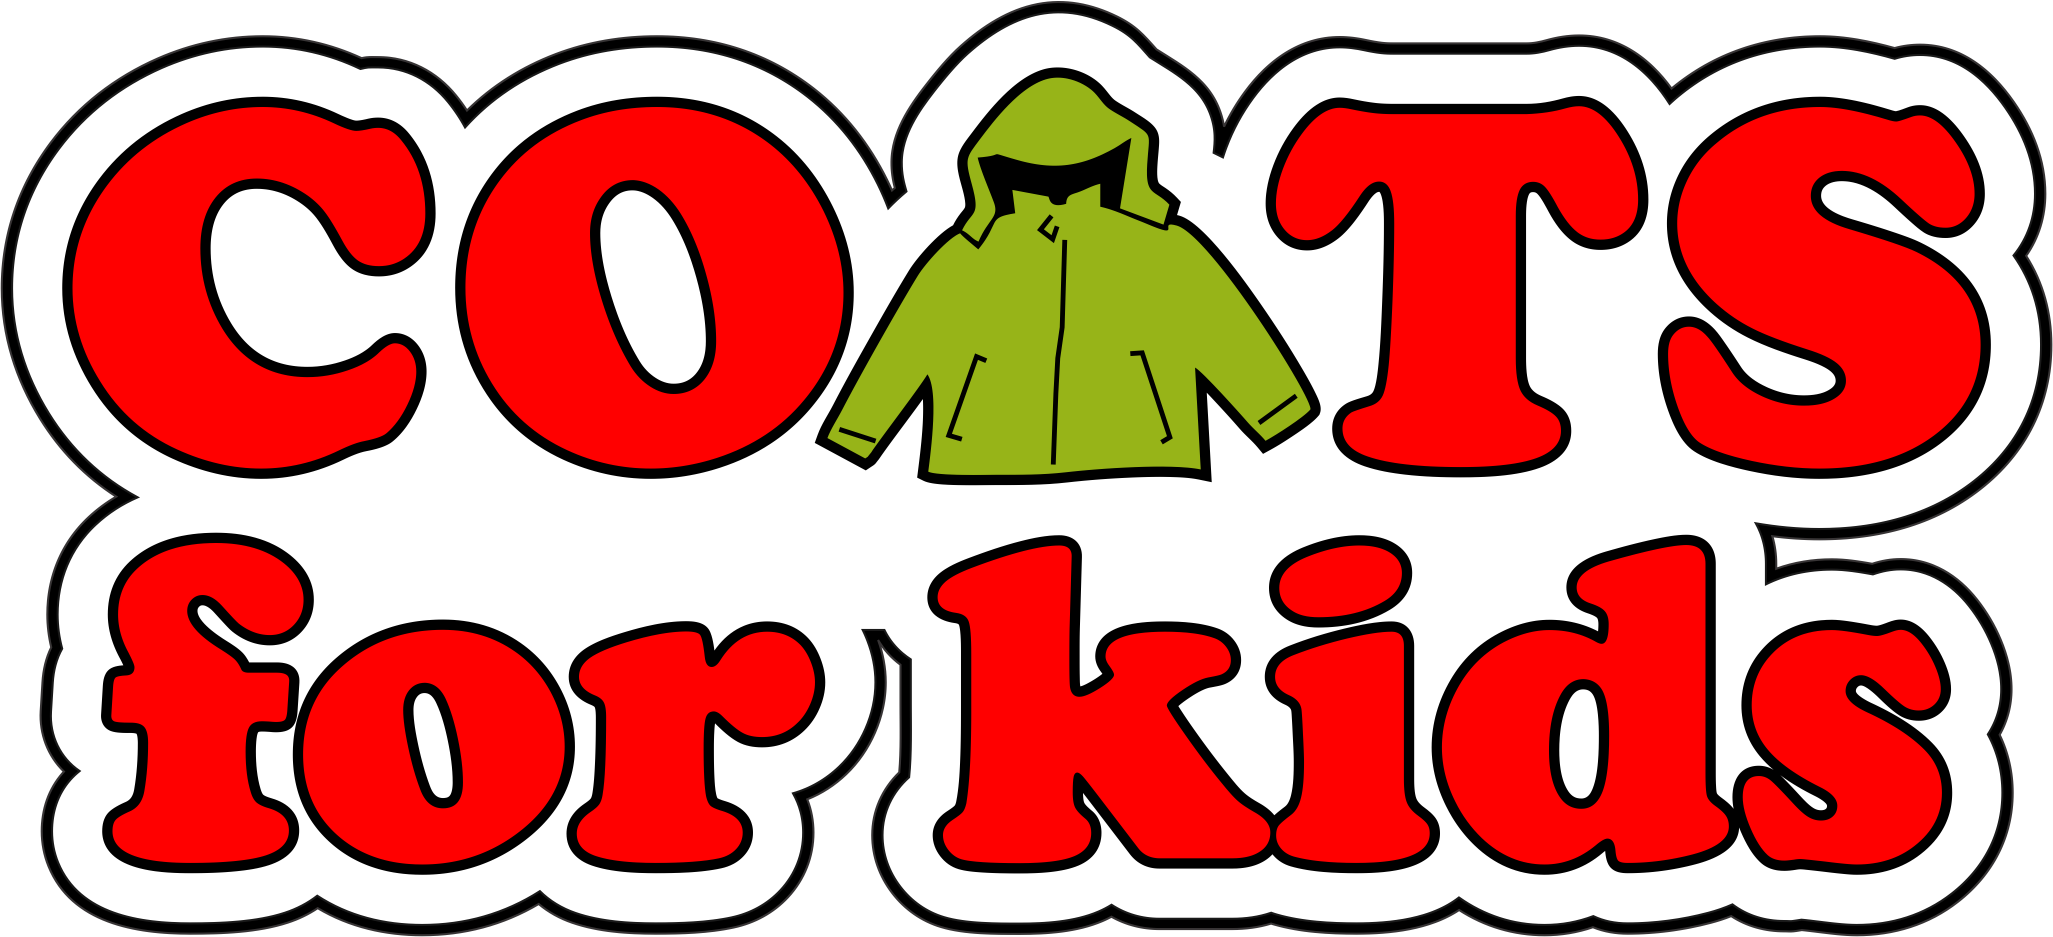 Las Cruces Coats For Kids - Coats For Kids Png (2053x937)